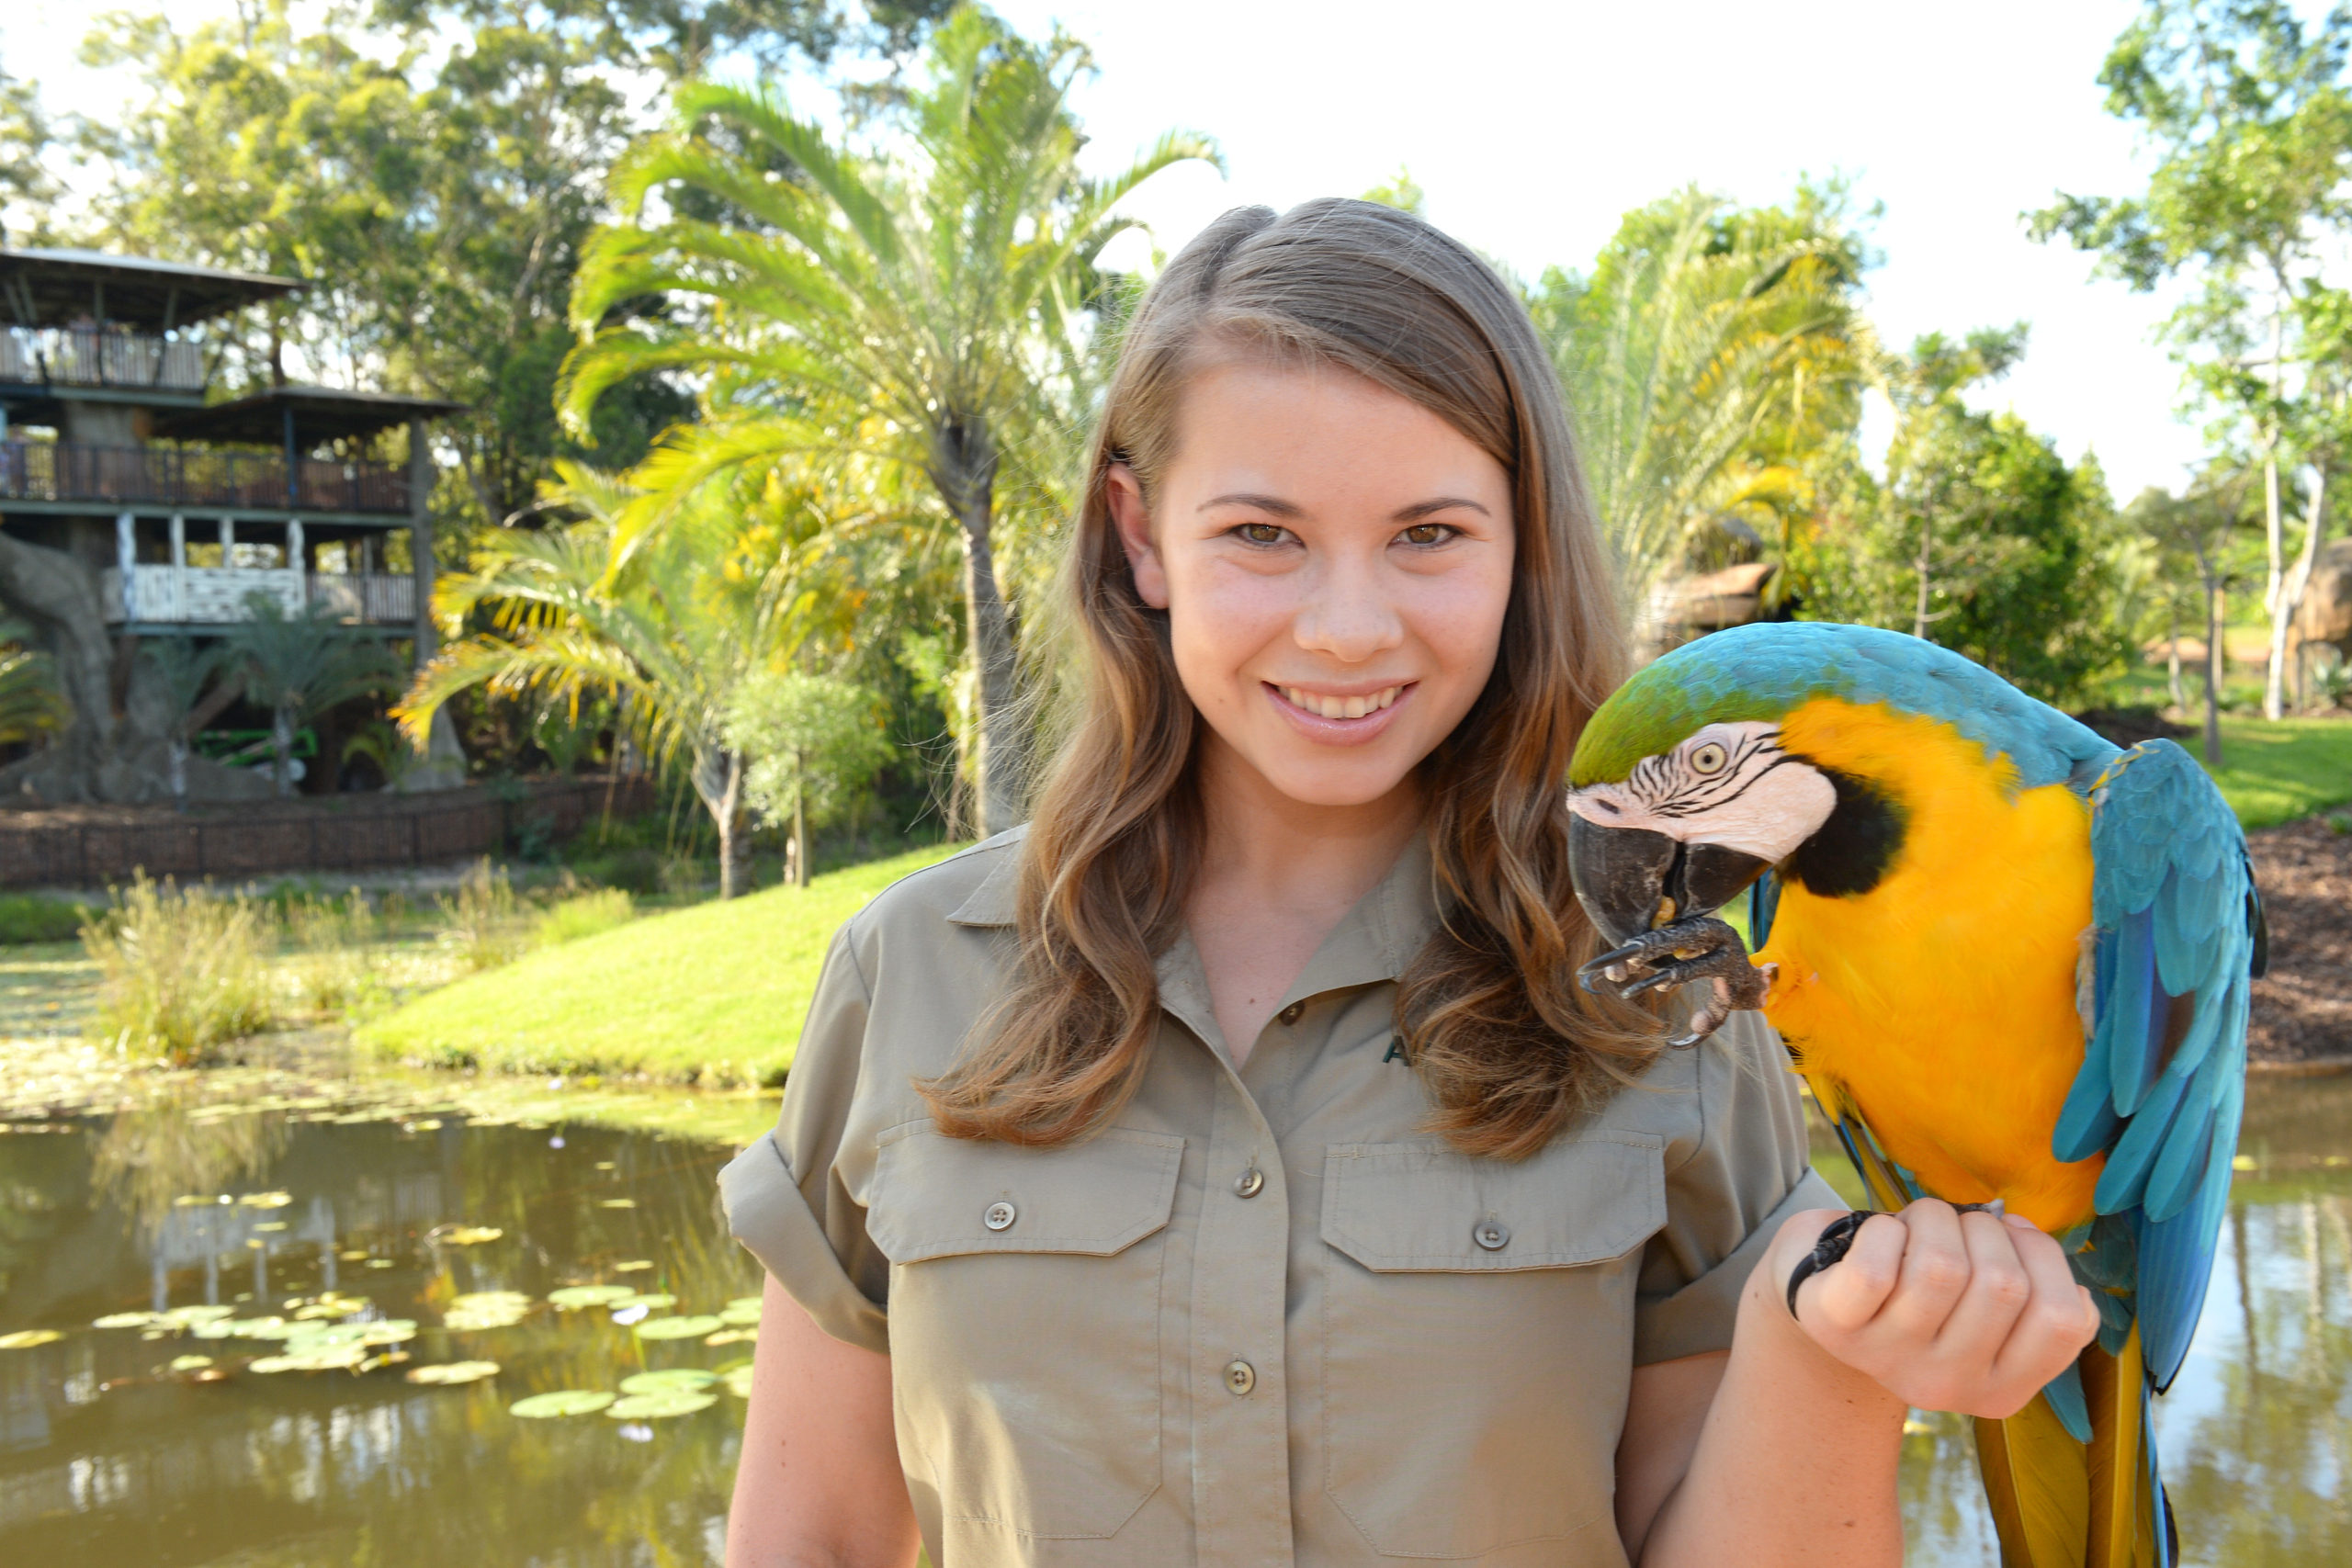 Bindi Irwin chats with The Urban Mum about where she loves to travel, about Australia Zoo, her favourite meals, and what she loves to watch on Netflix.